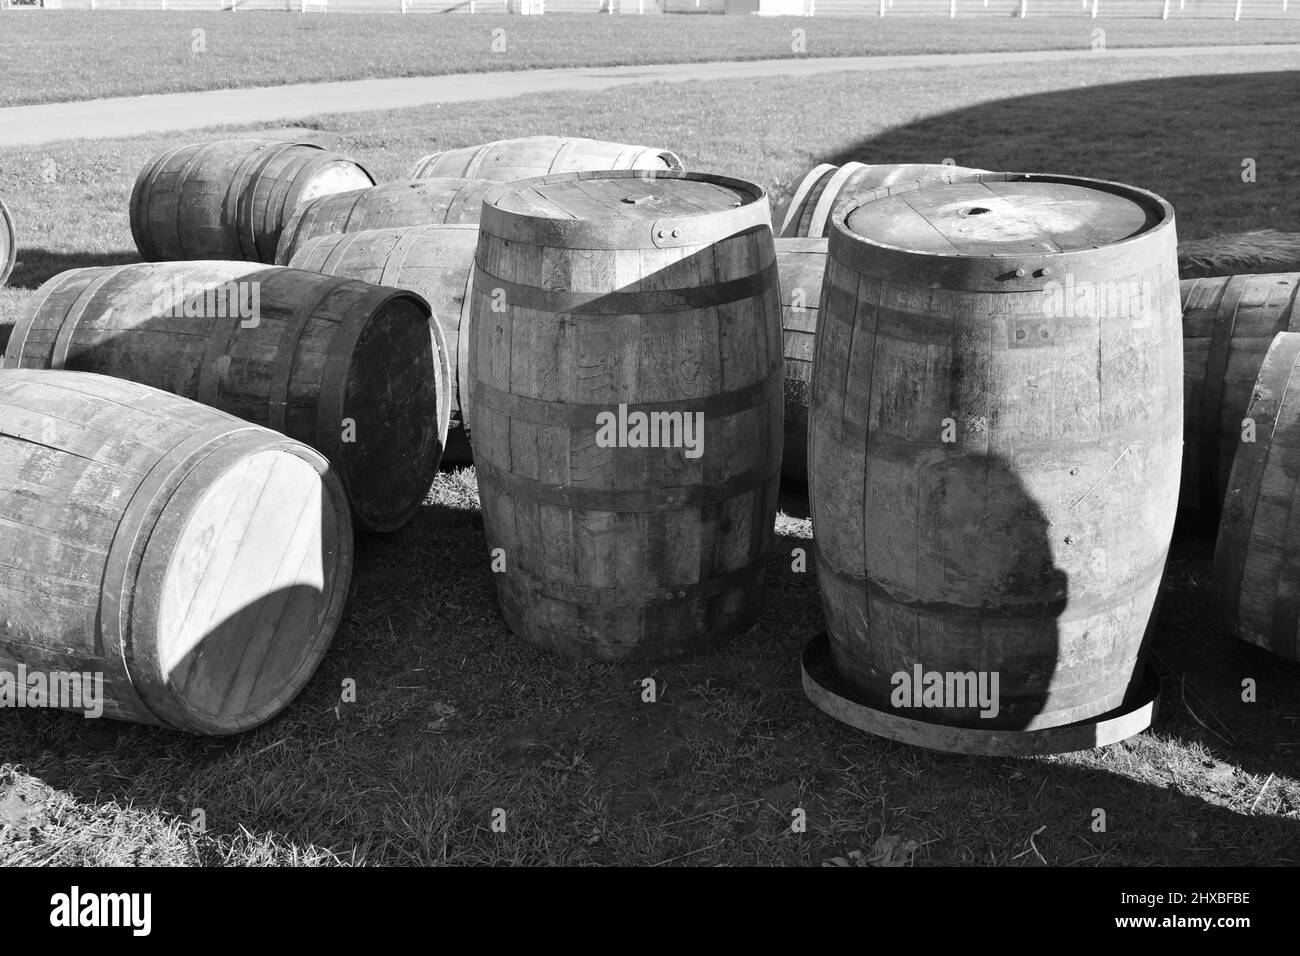 close up of old fashioned wooden beer barrels stood on grass outside on a sunny day.  Old wood kegs full of alcohol Stock Photo